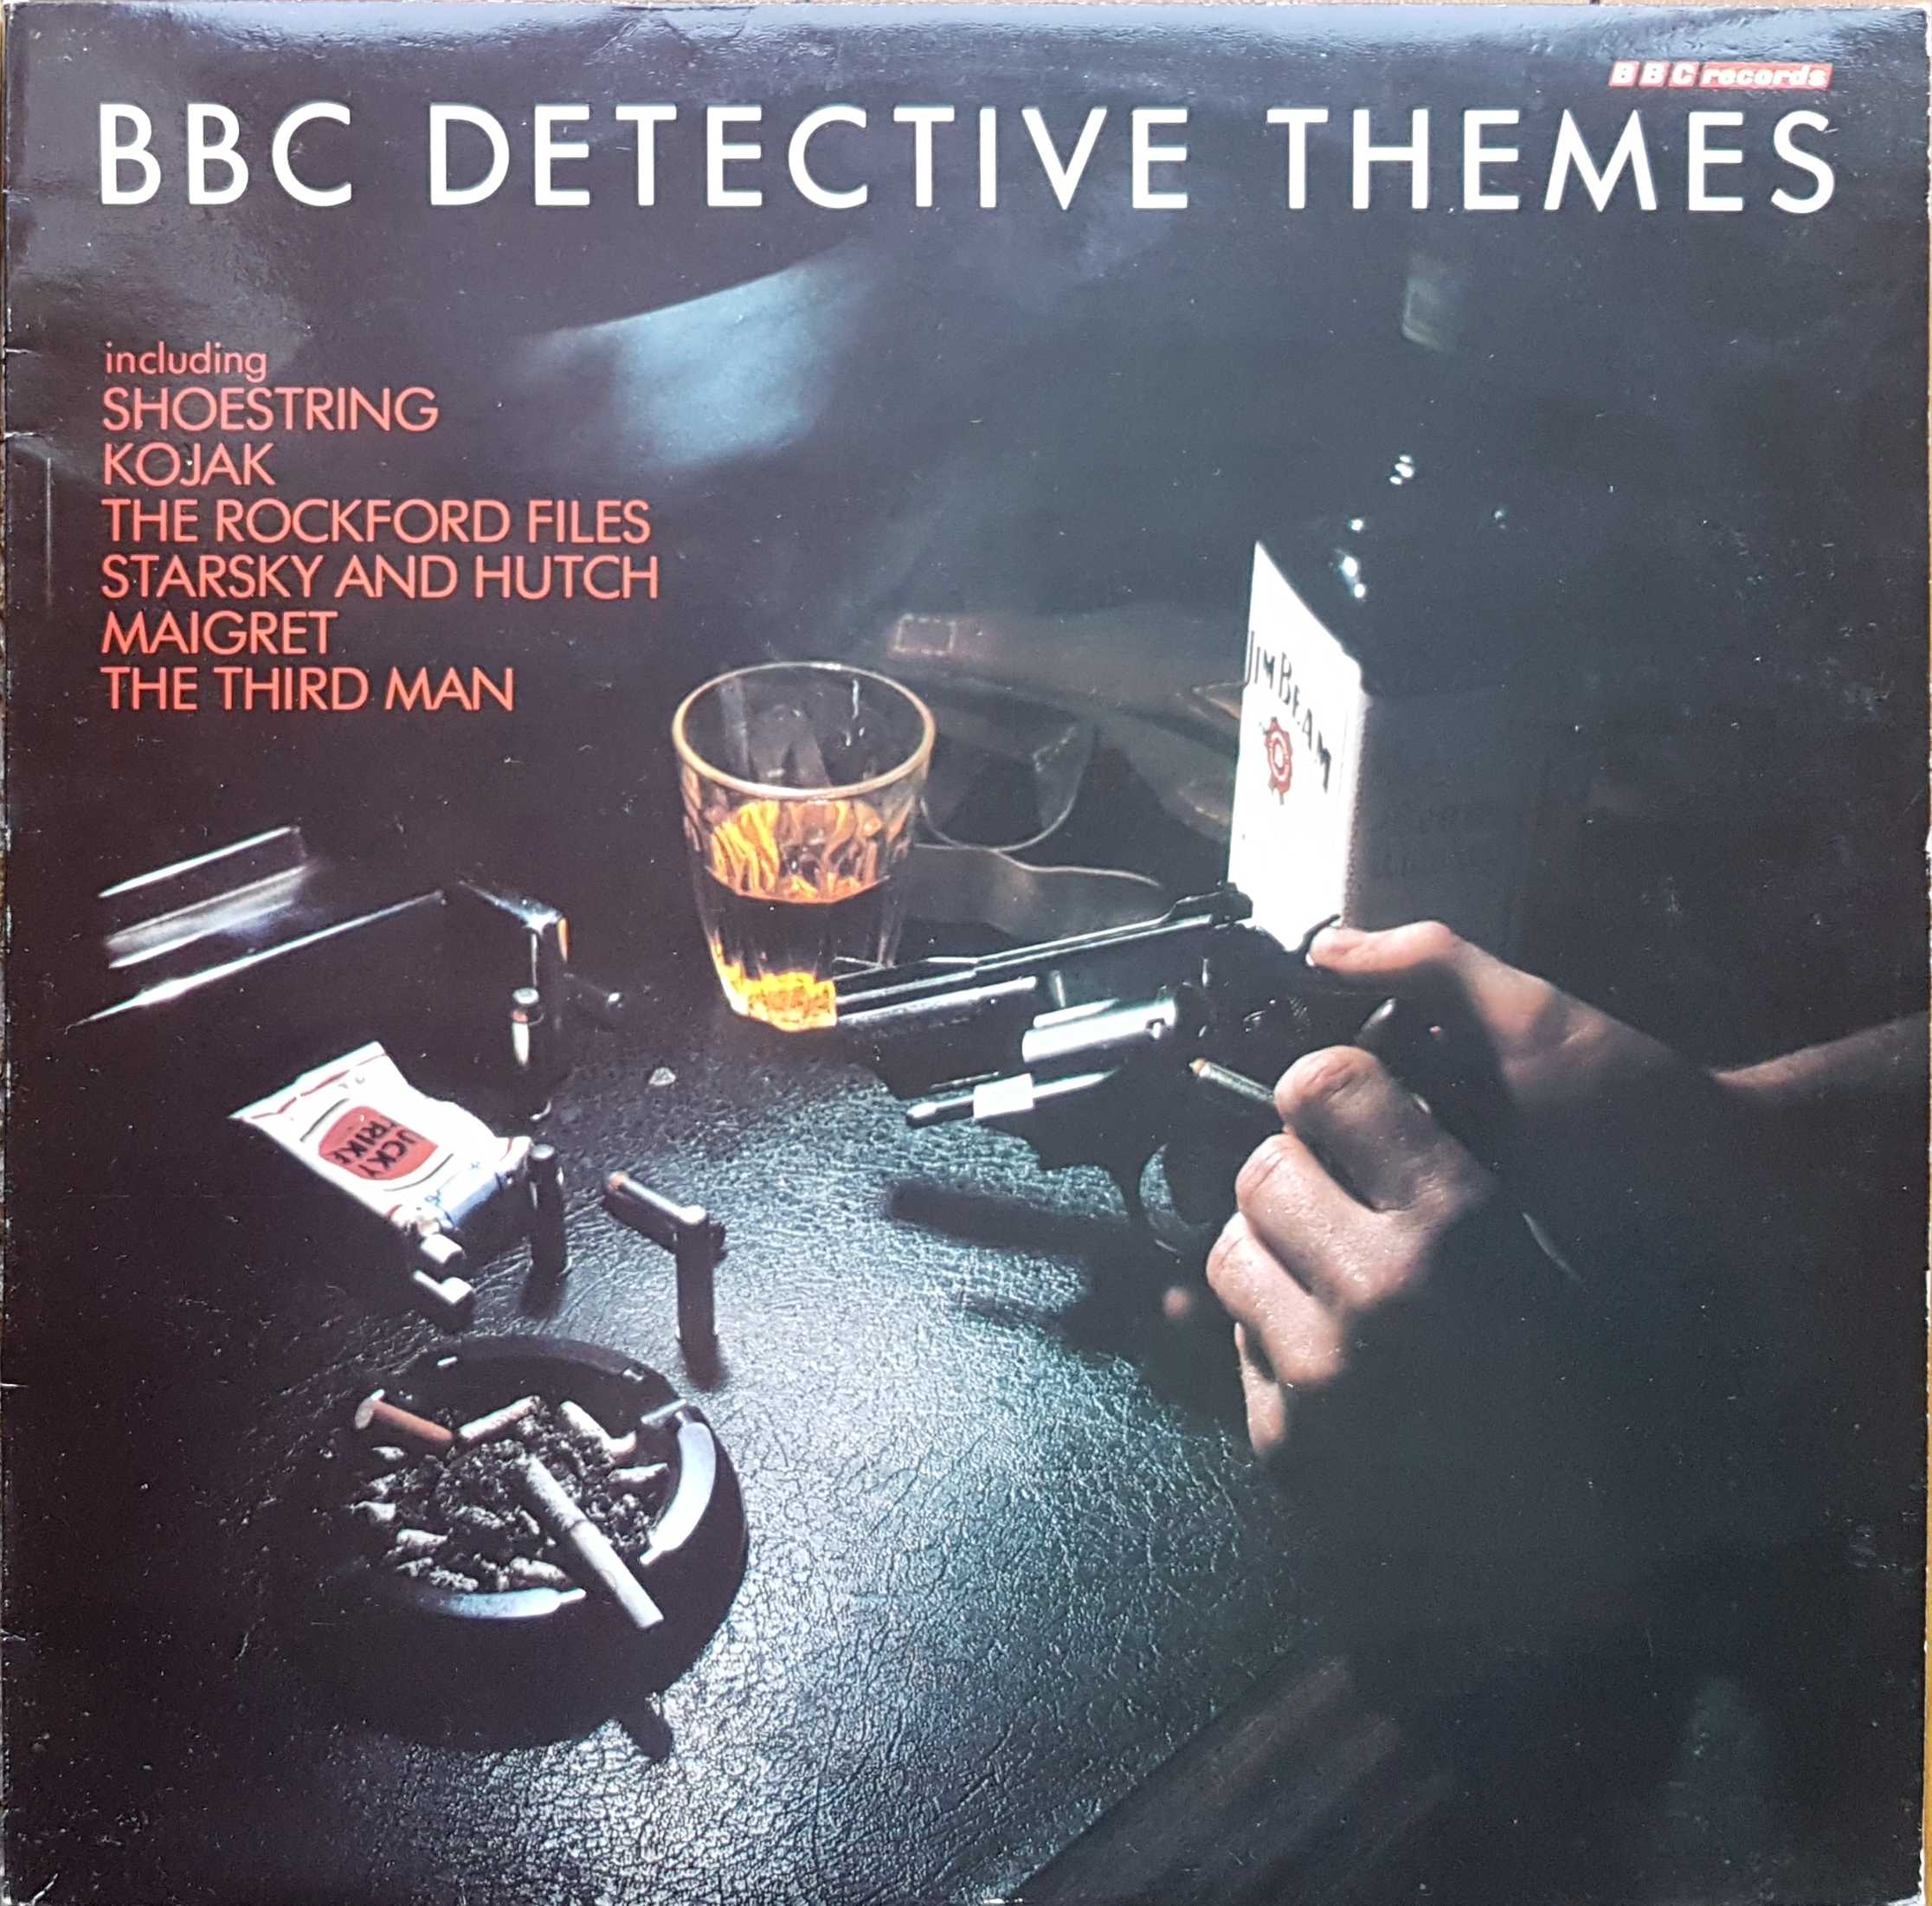 Picture of REH 378 BBC detective themes by artist Various from the BBC albums - Records and Tapes library